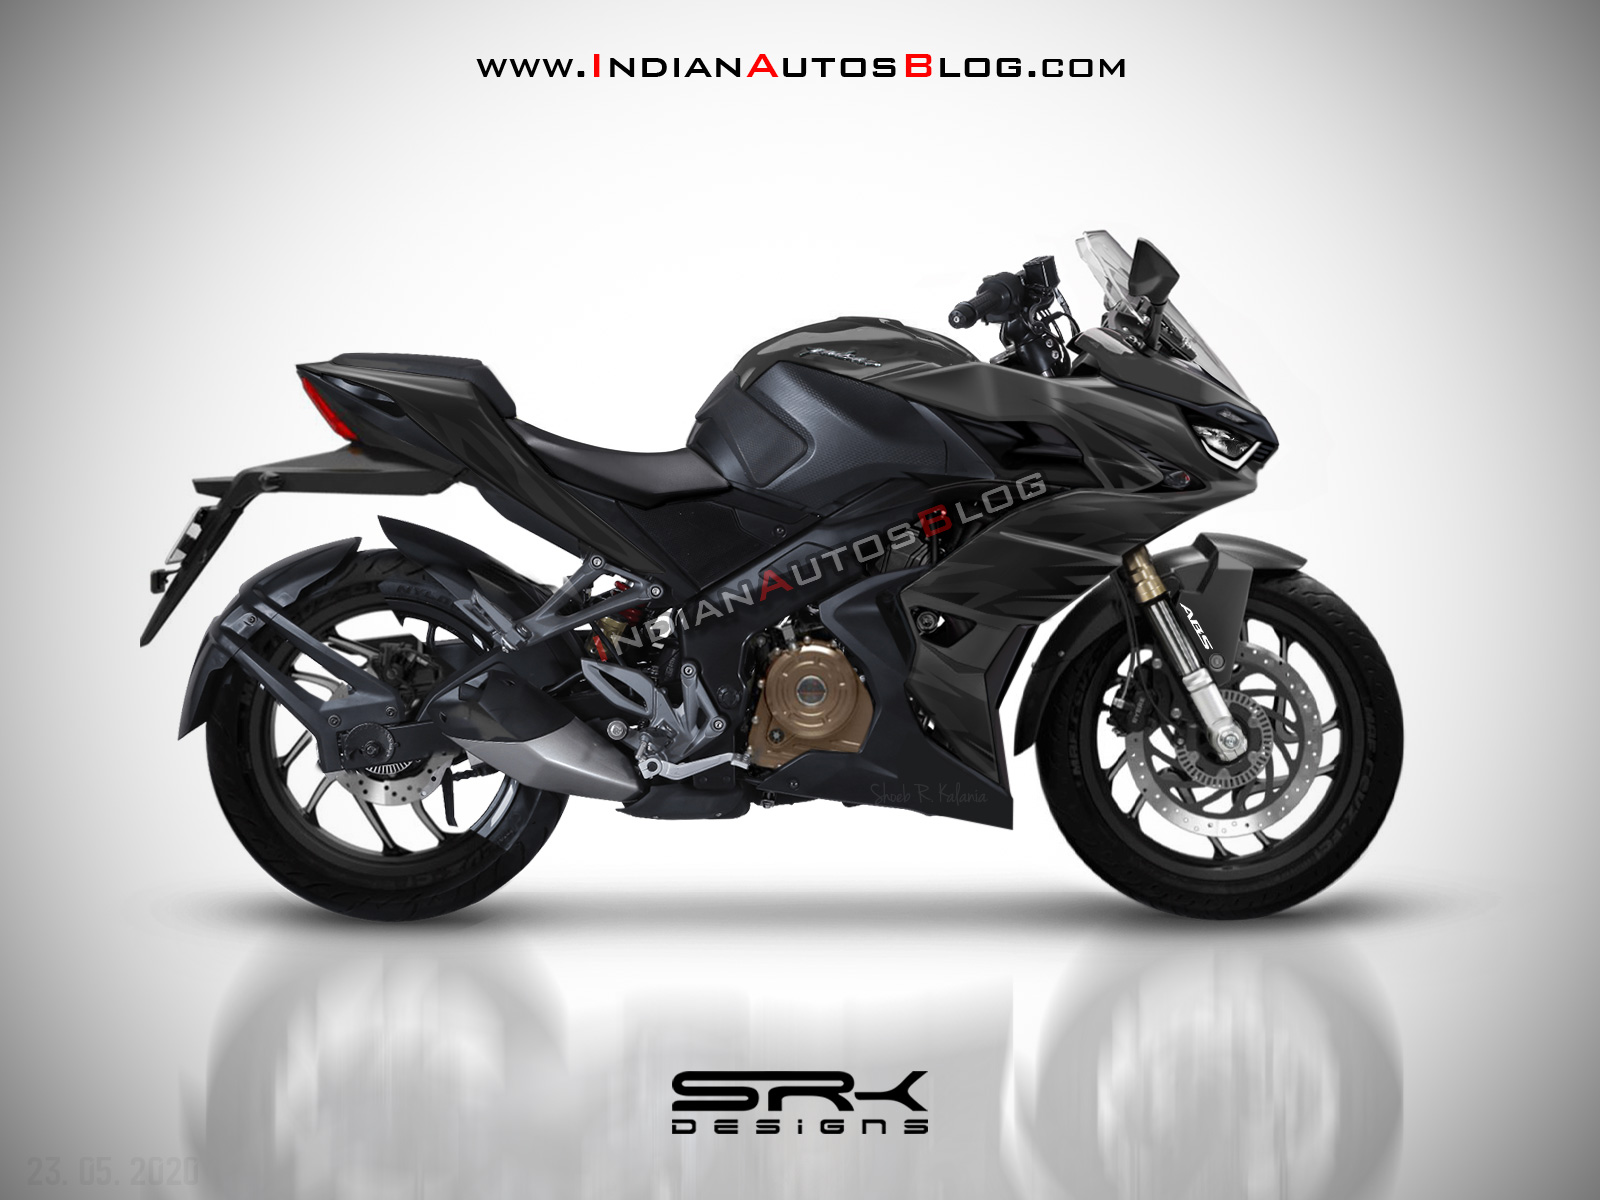 Here’s how the Bajaj Pulsar RS400 could look like